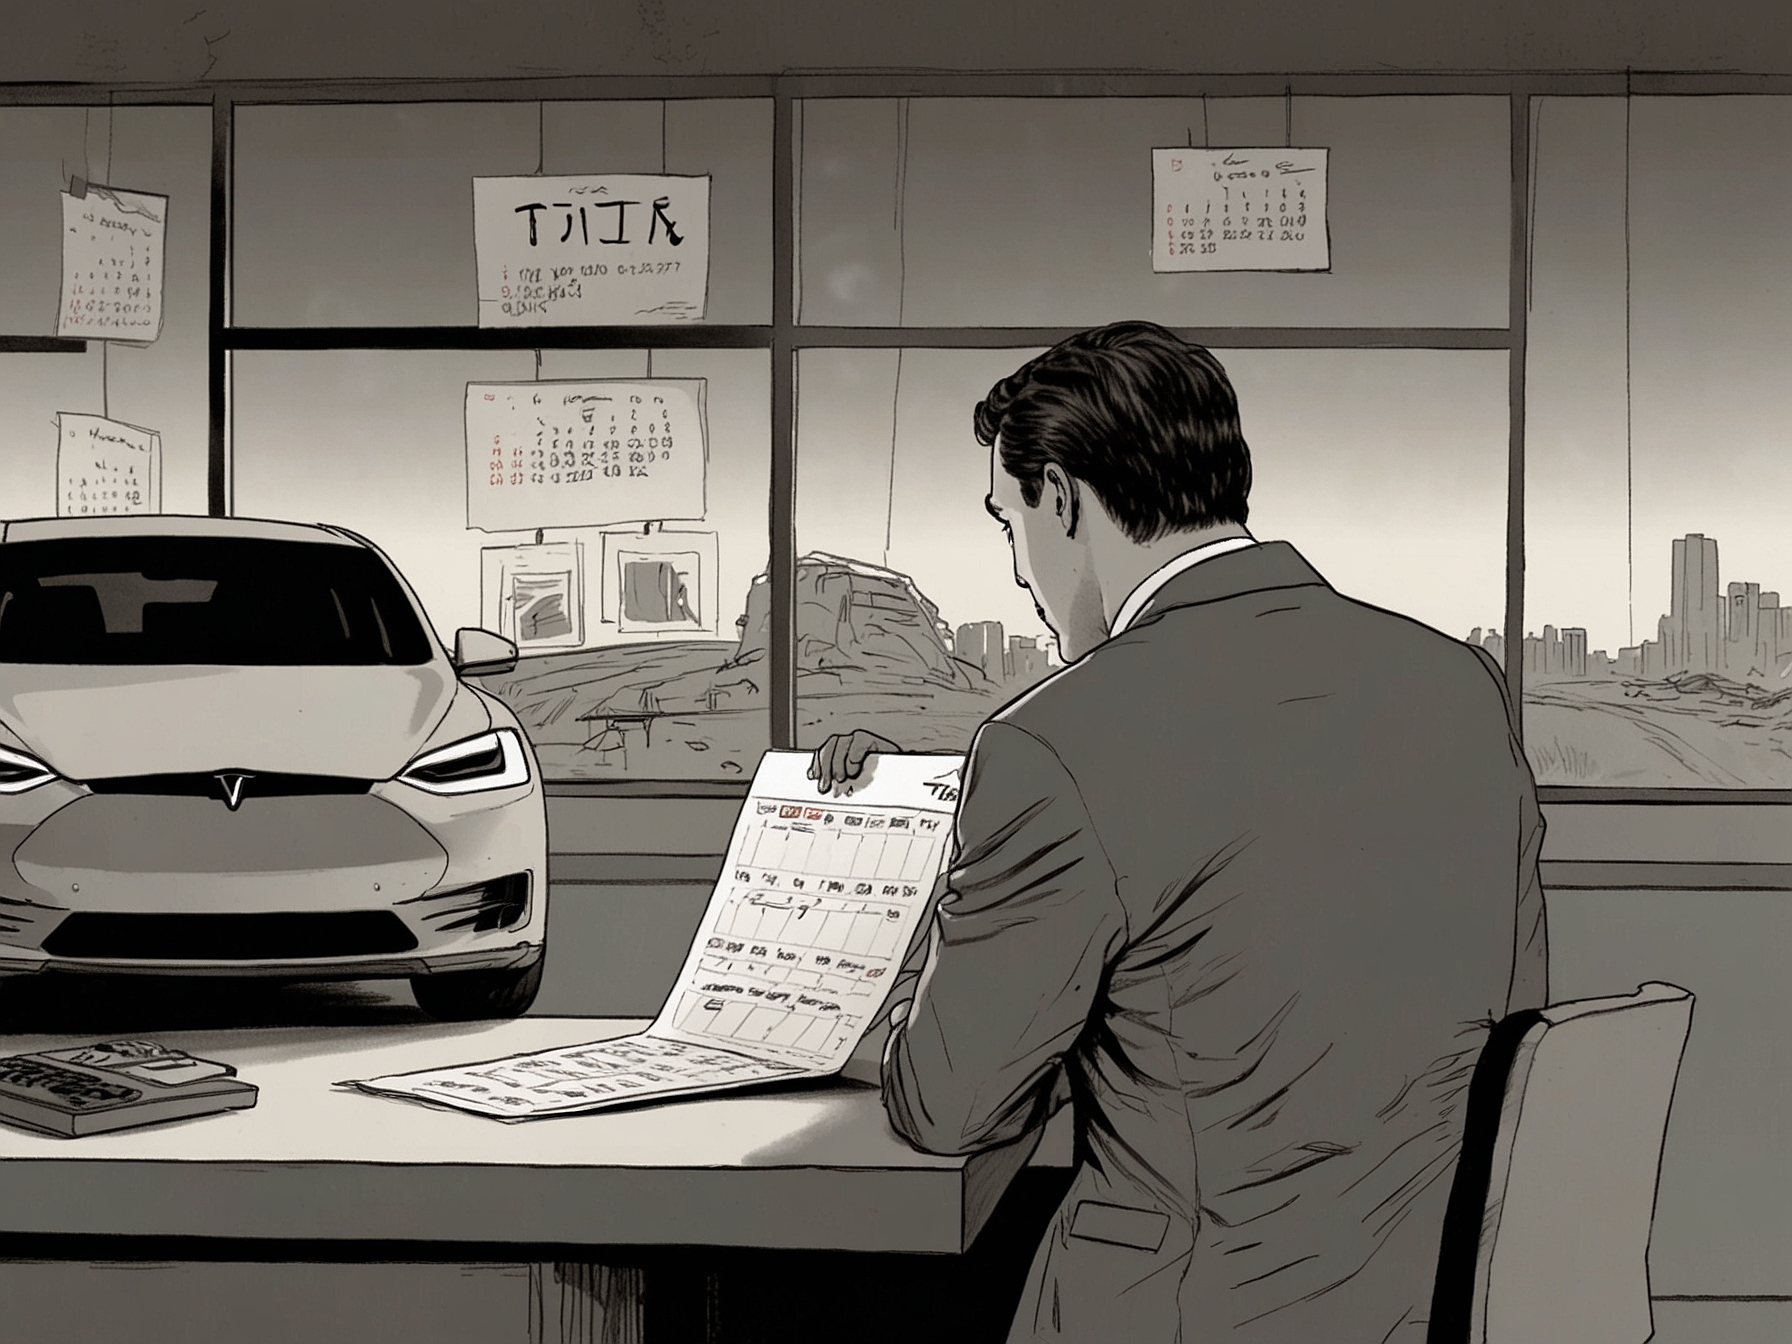 An illustration of an anxious Tesla buyer, looking at a calendar, symbolizing the anticipation and uncertainty among customers awaiting the delayed Cybertruck deliveries.